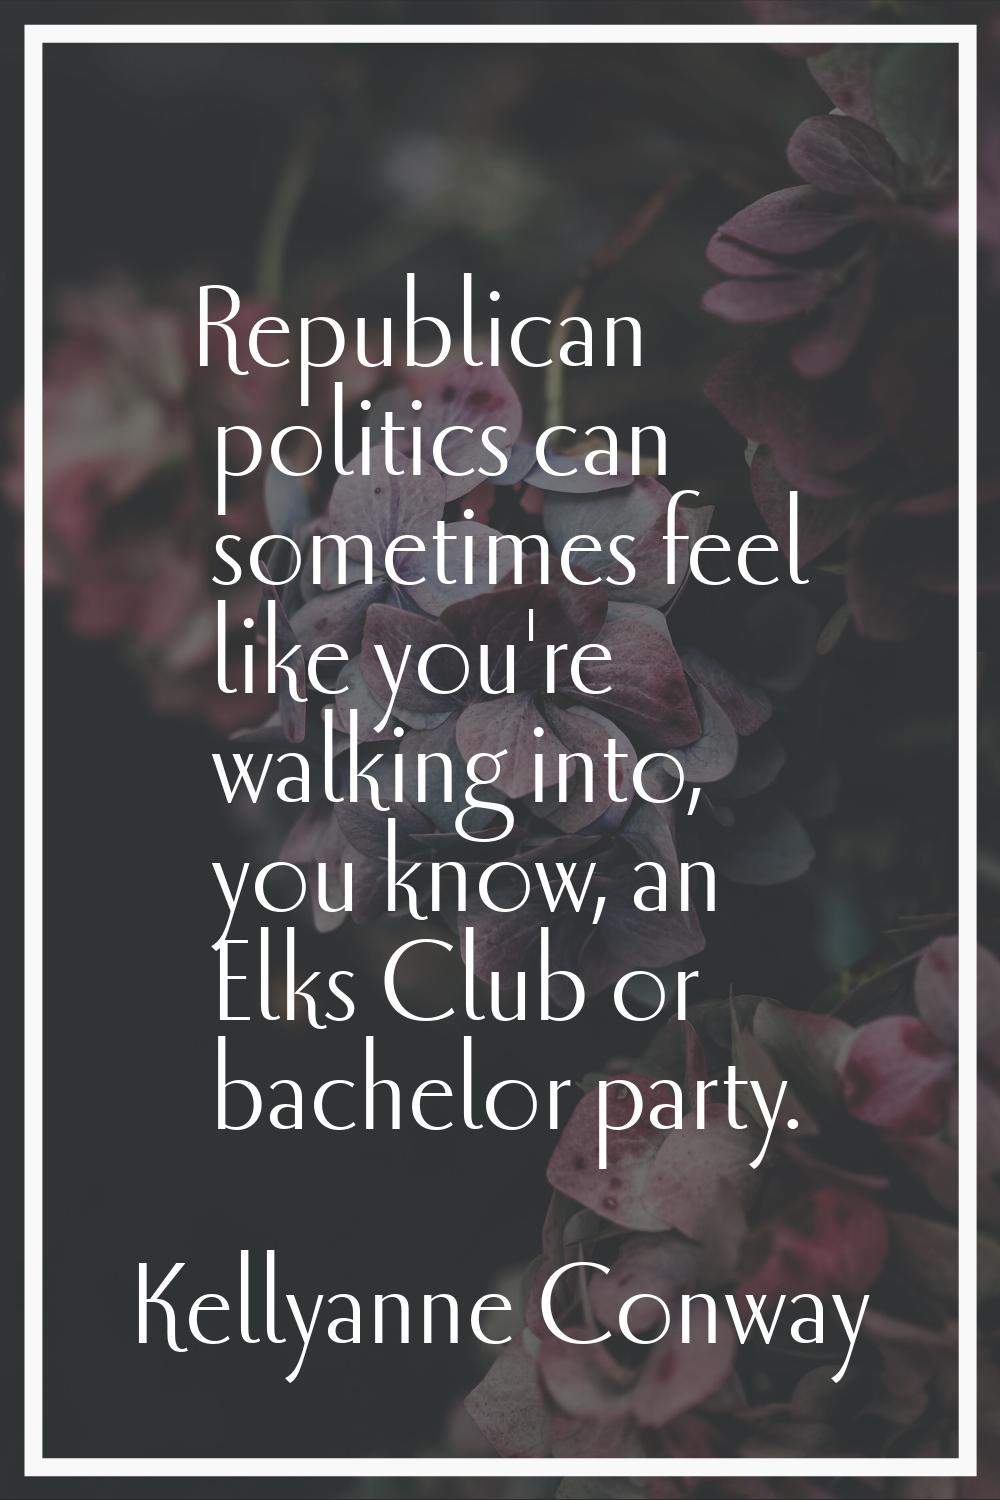 Republican politics can sometimes feel like you're walking into, you know, an Elks Club or bachelor